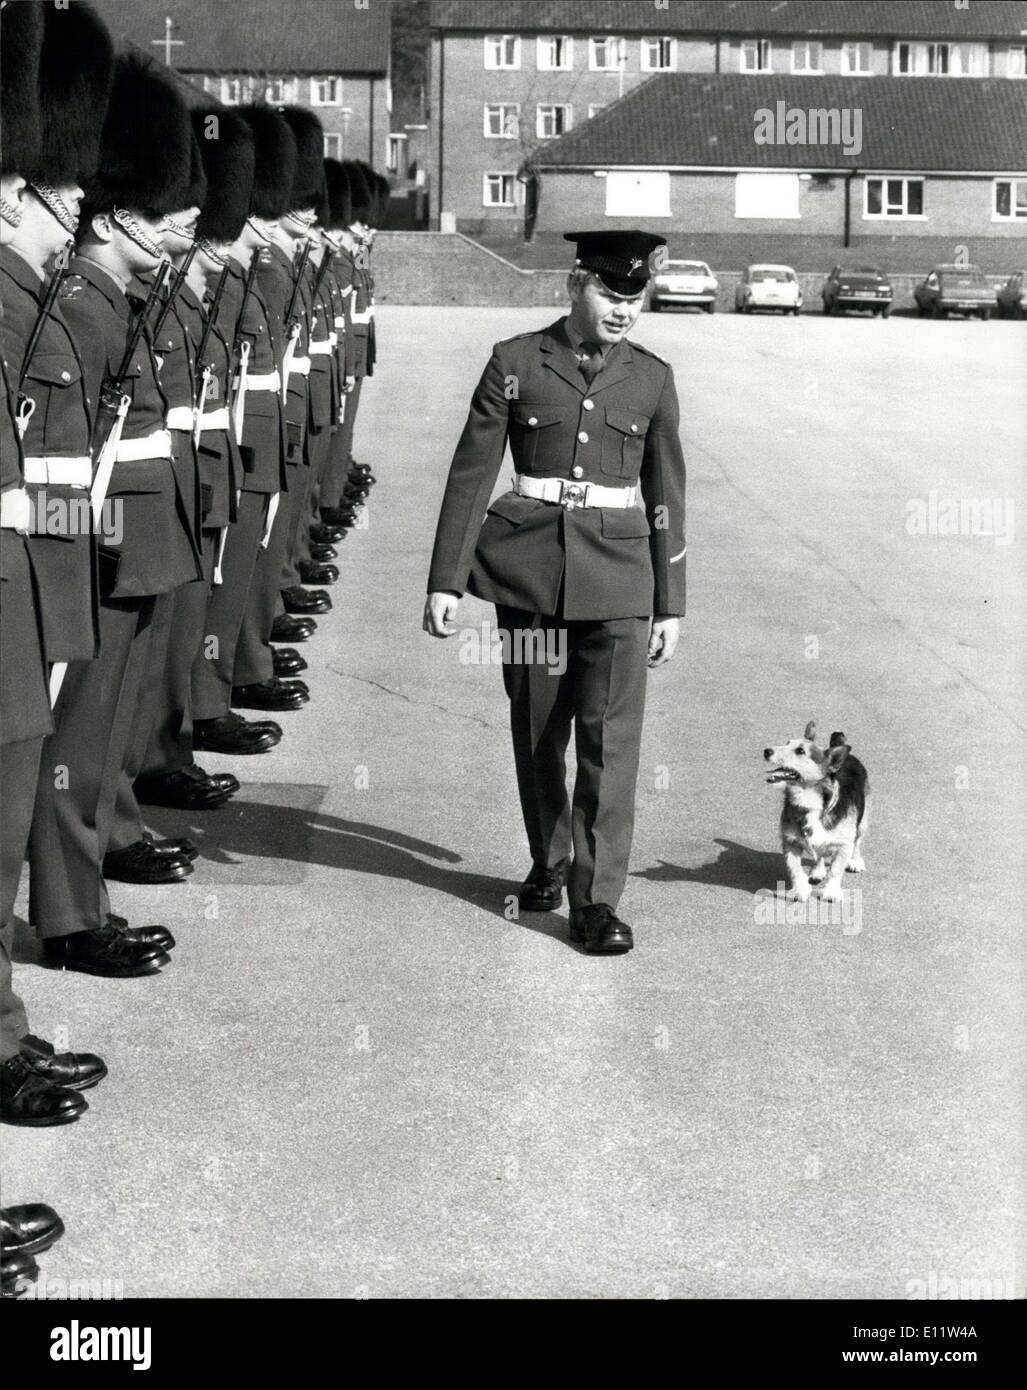 Apr. 09, 1980 - The Welsh guards parade to say farewell to rats: At Elizabeth Barracks, Pirbright Camp, Brookwood Woking, Surrey, today the 1st Battalion Welsh Guards were on parade to say farewell to Rats the crossbred (Oorgie/Terrier?) who has been retired on verterinary advice, Rats is thought to be 8 years old and much of his life has been spent with the roulement Companies in Crossmaglen South Armagh, Norther Ireland. In December last year he was awarded the Pro dogs Gold medal for the Dog most Devoted to Duty and was given leave to return to London for the presentation Stock Photo